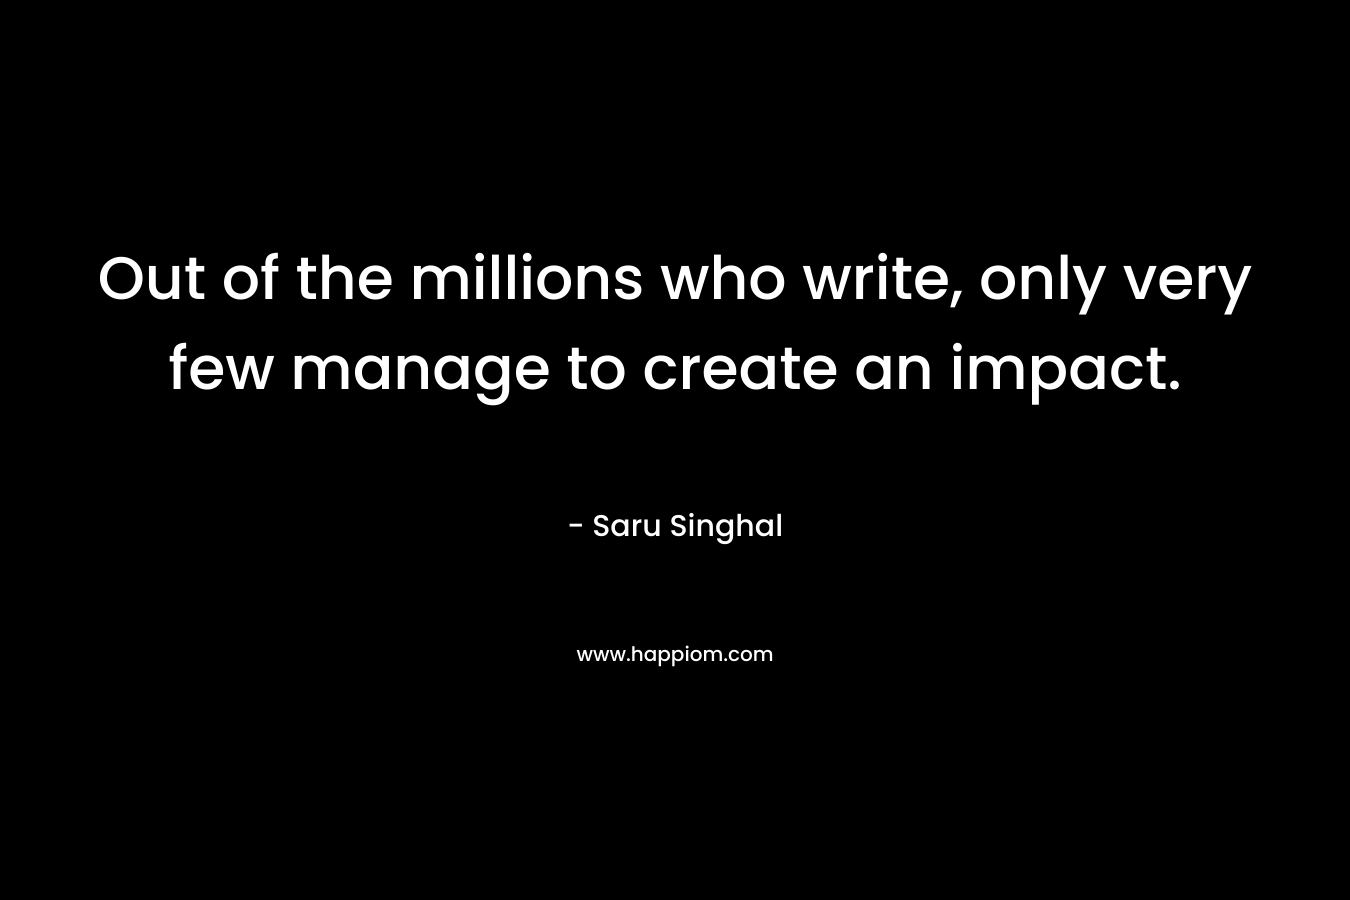 Out of the millions who write, only very few manage to create an impact. – Saru Singhal